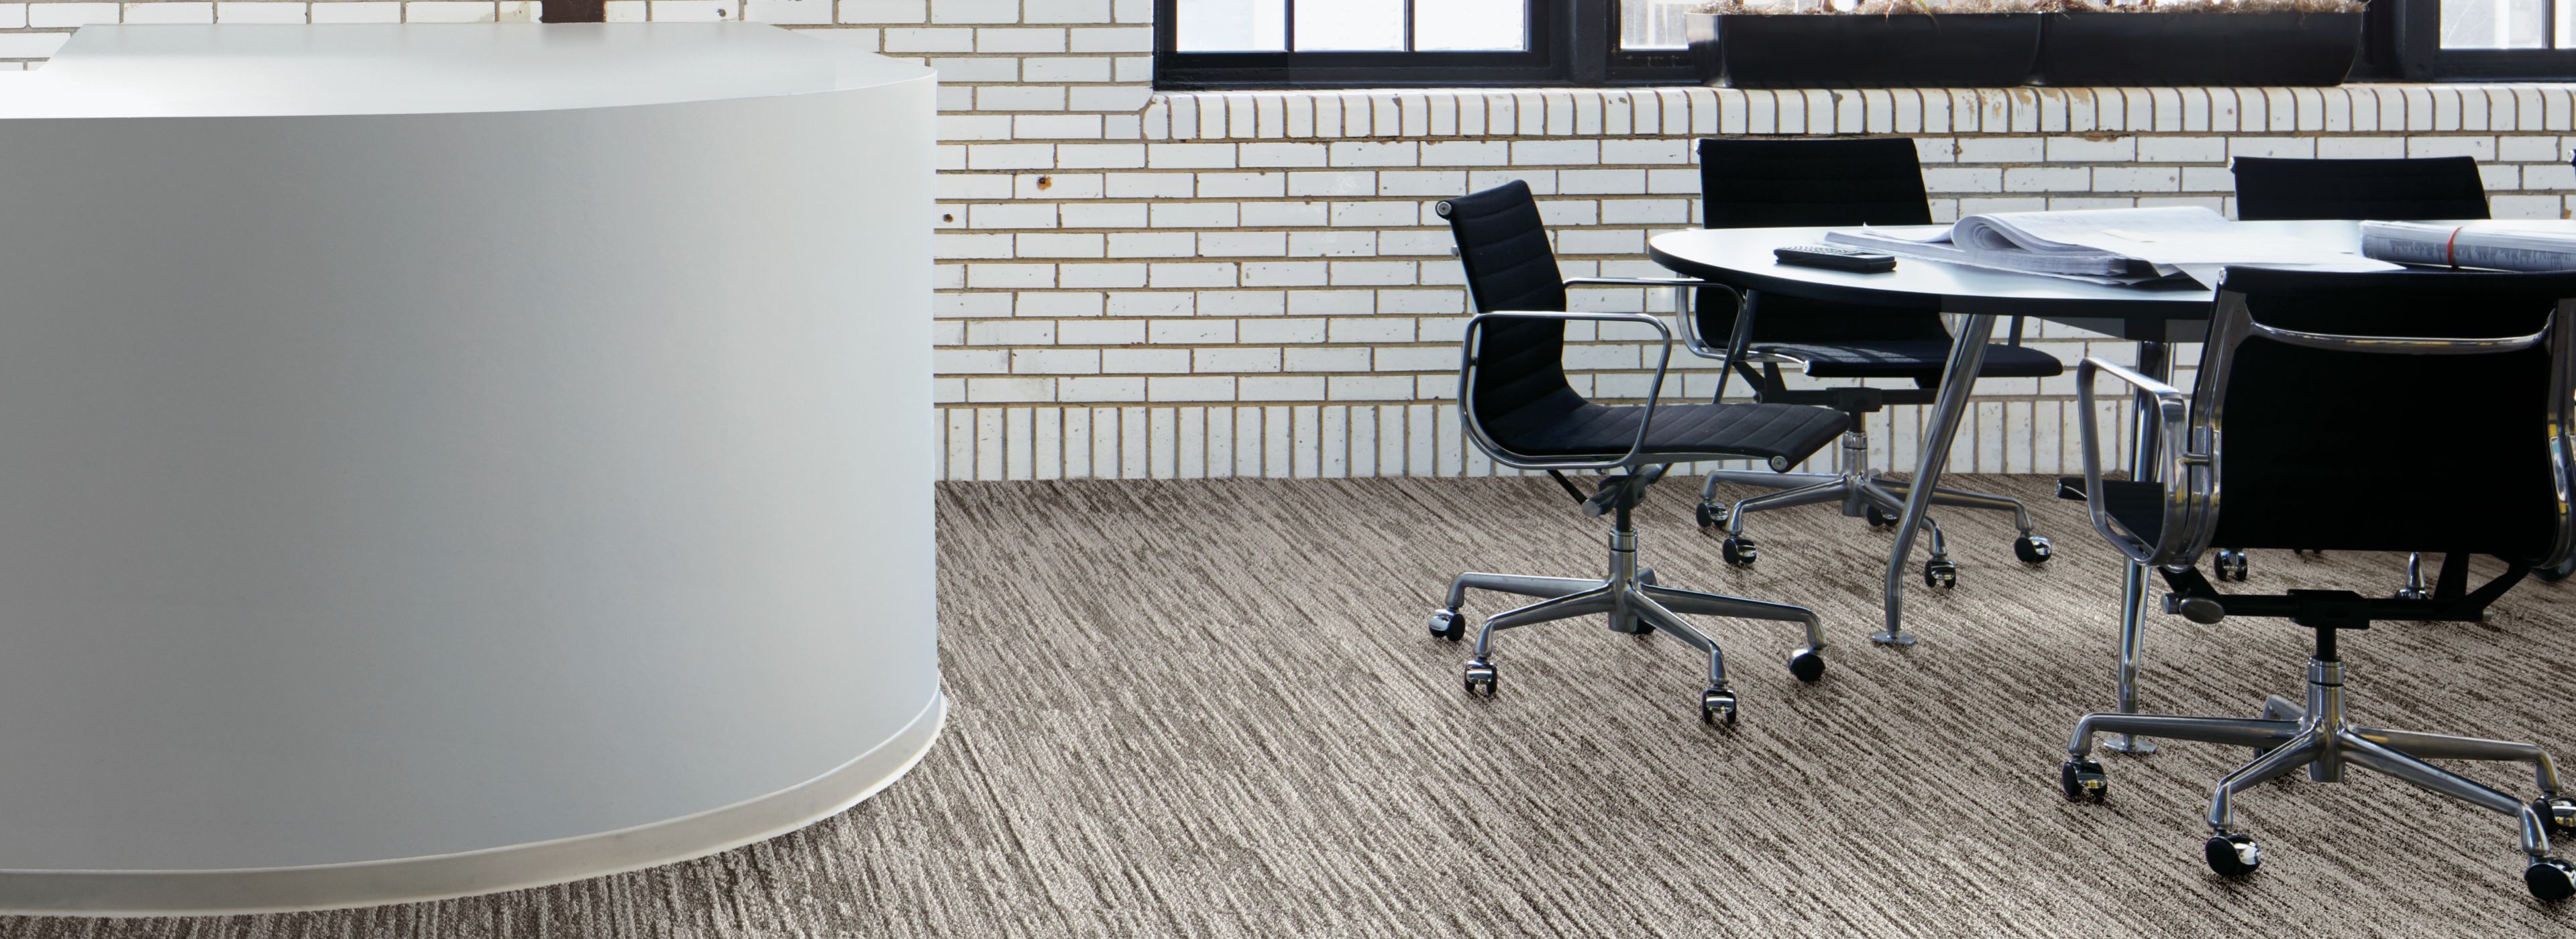 Interface Progression I plank carpet tile in meeting area with four chairs and table imagen número 1